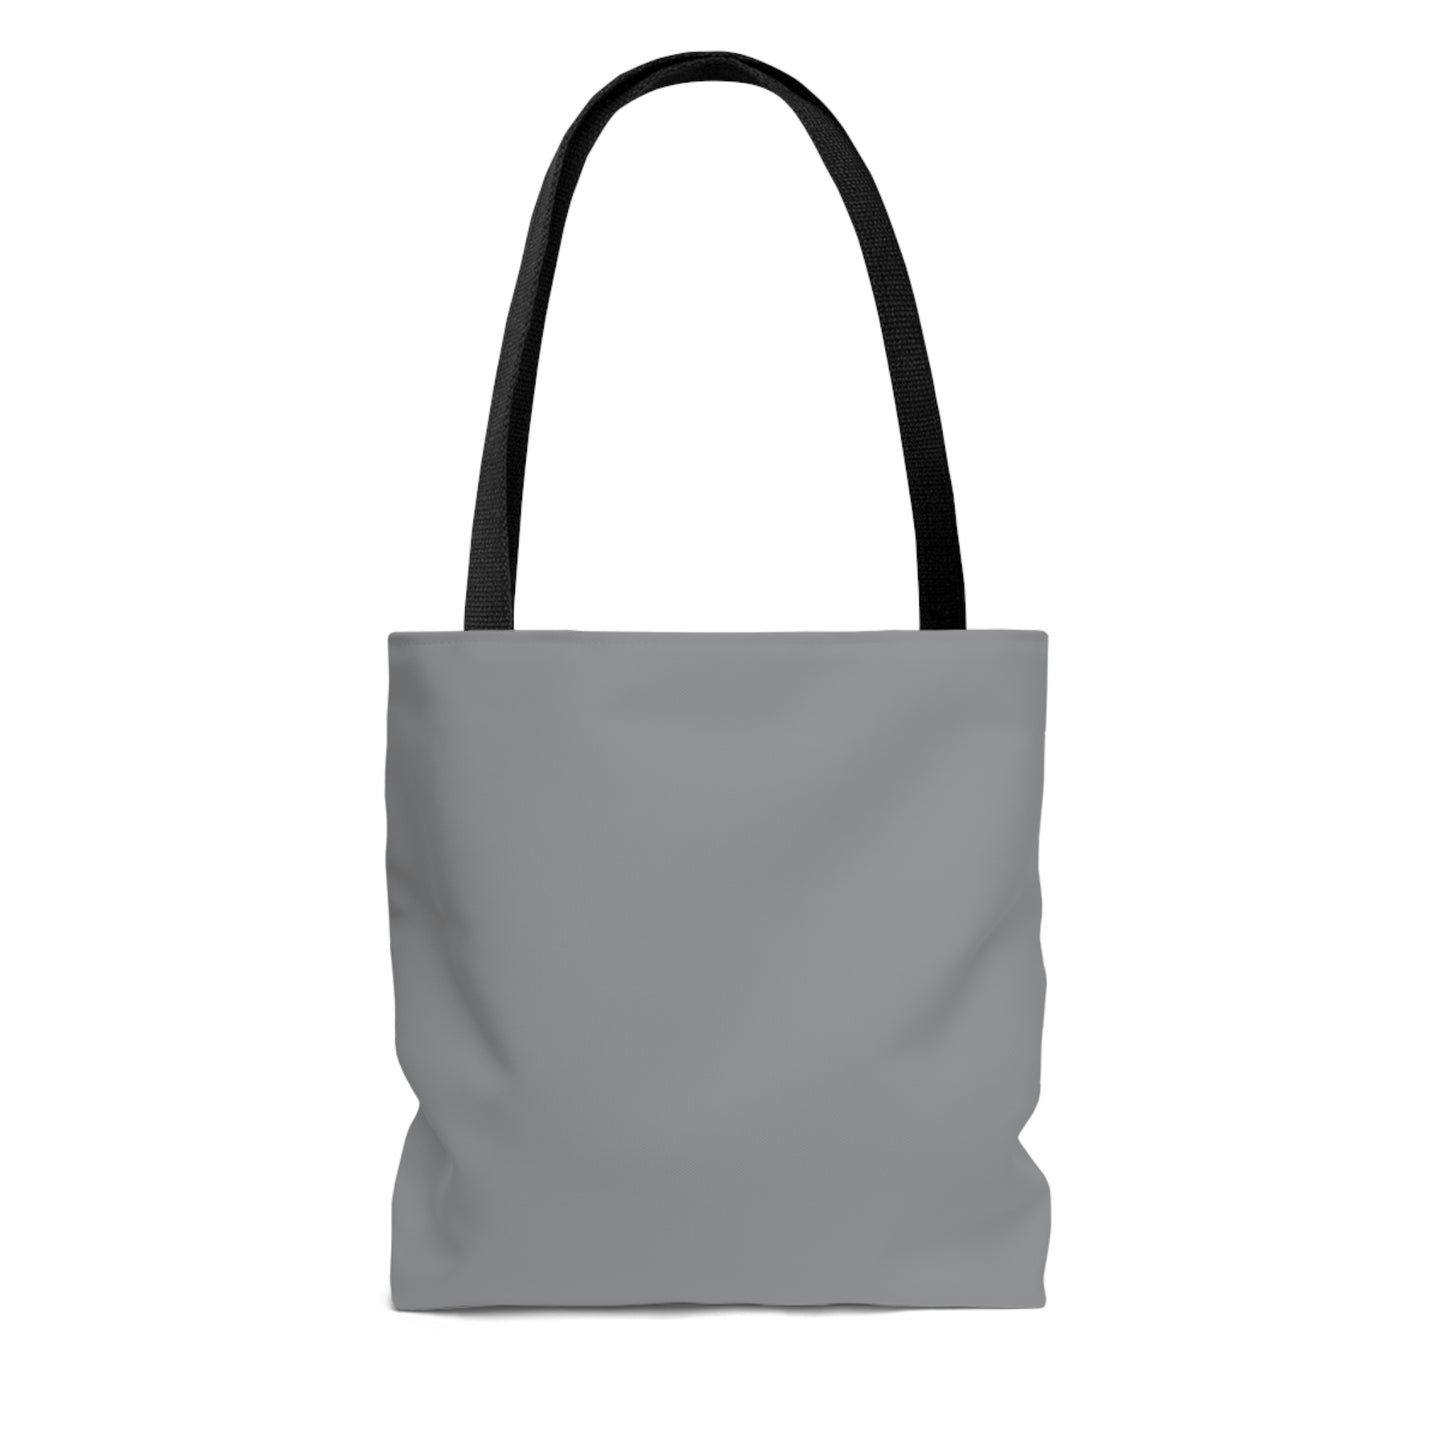 Blessed To Be An Answered Prayer Tote Bag